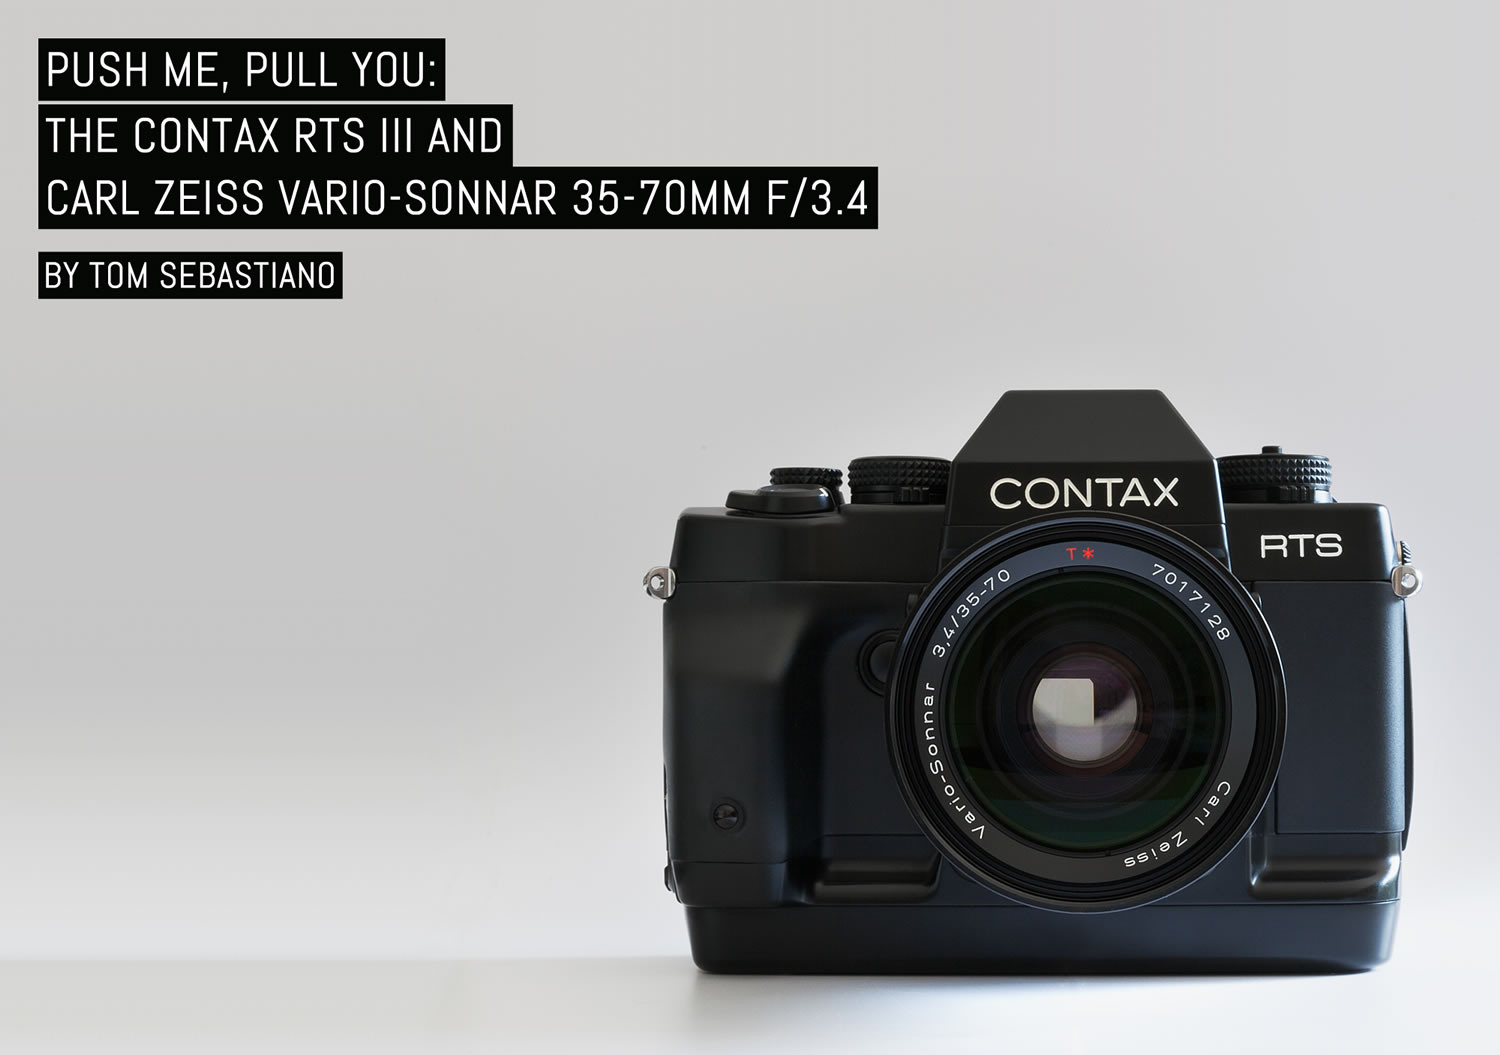 Push me, pull you: The Contax RTS III and Carl Zeiss Vario-Sonnar 35-70mm f/3.4